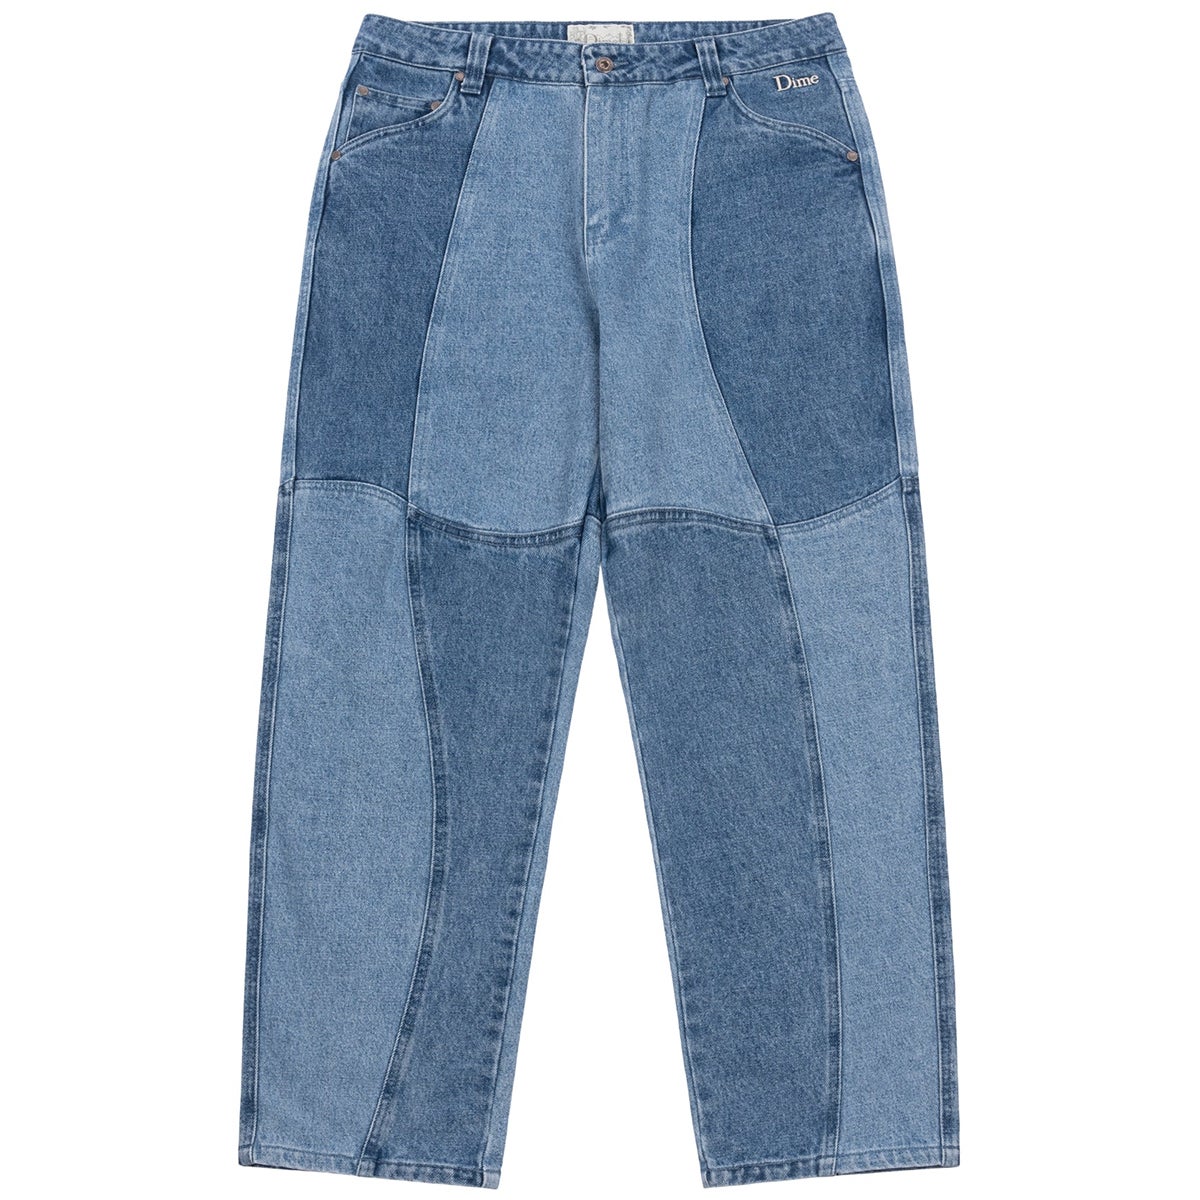 Dime Blocked Relaxed Denim Pants in Blue Washed | Boardertown